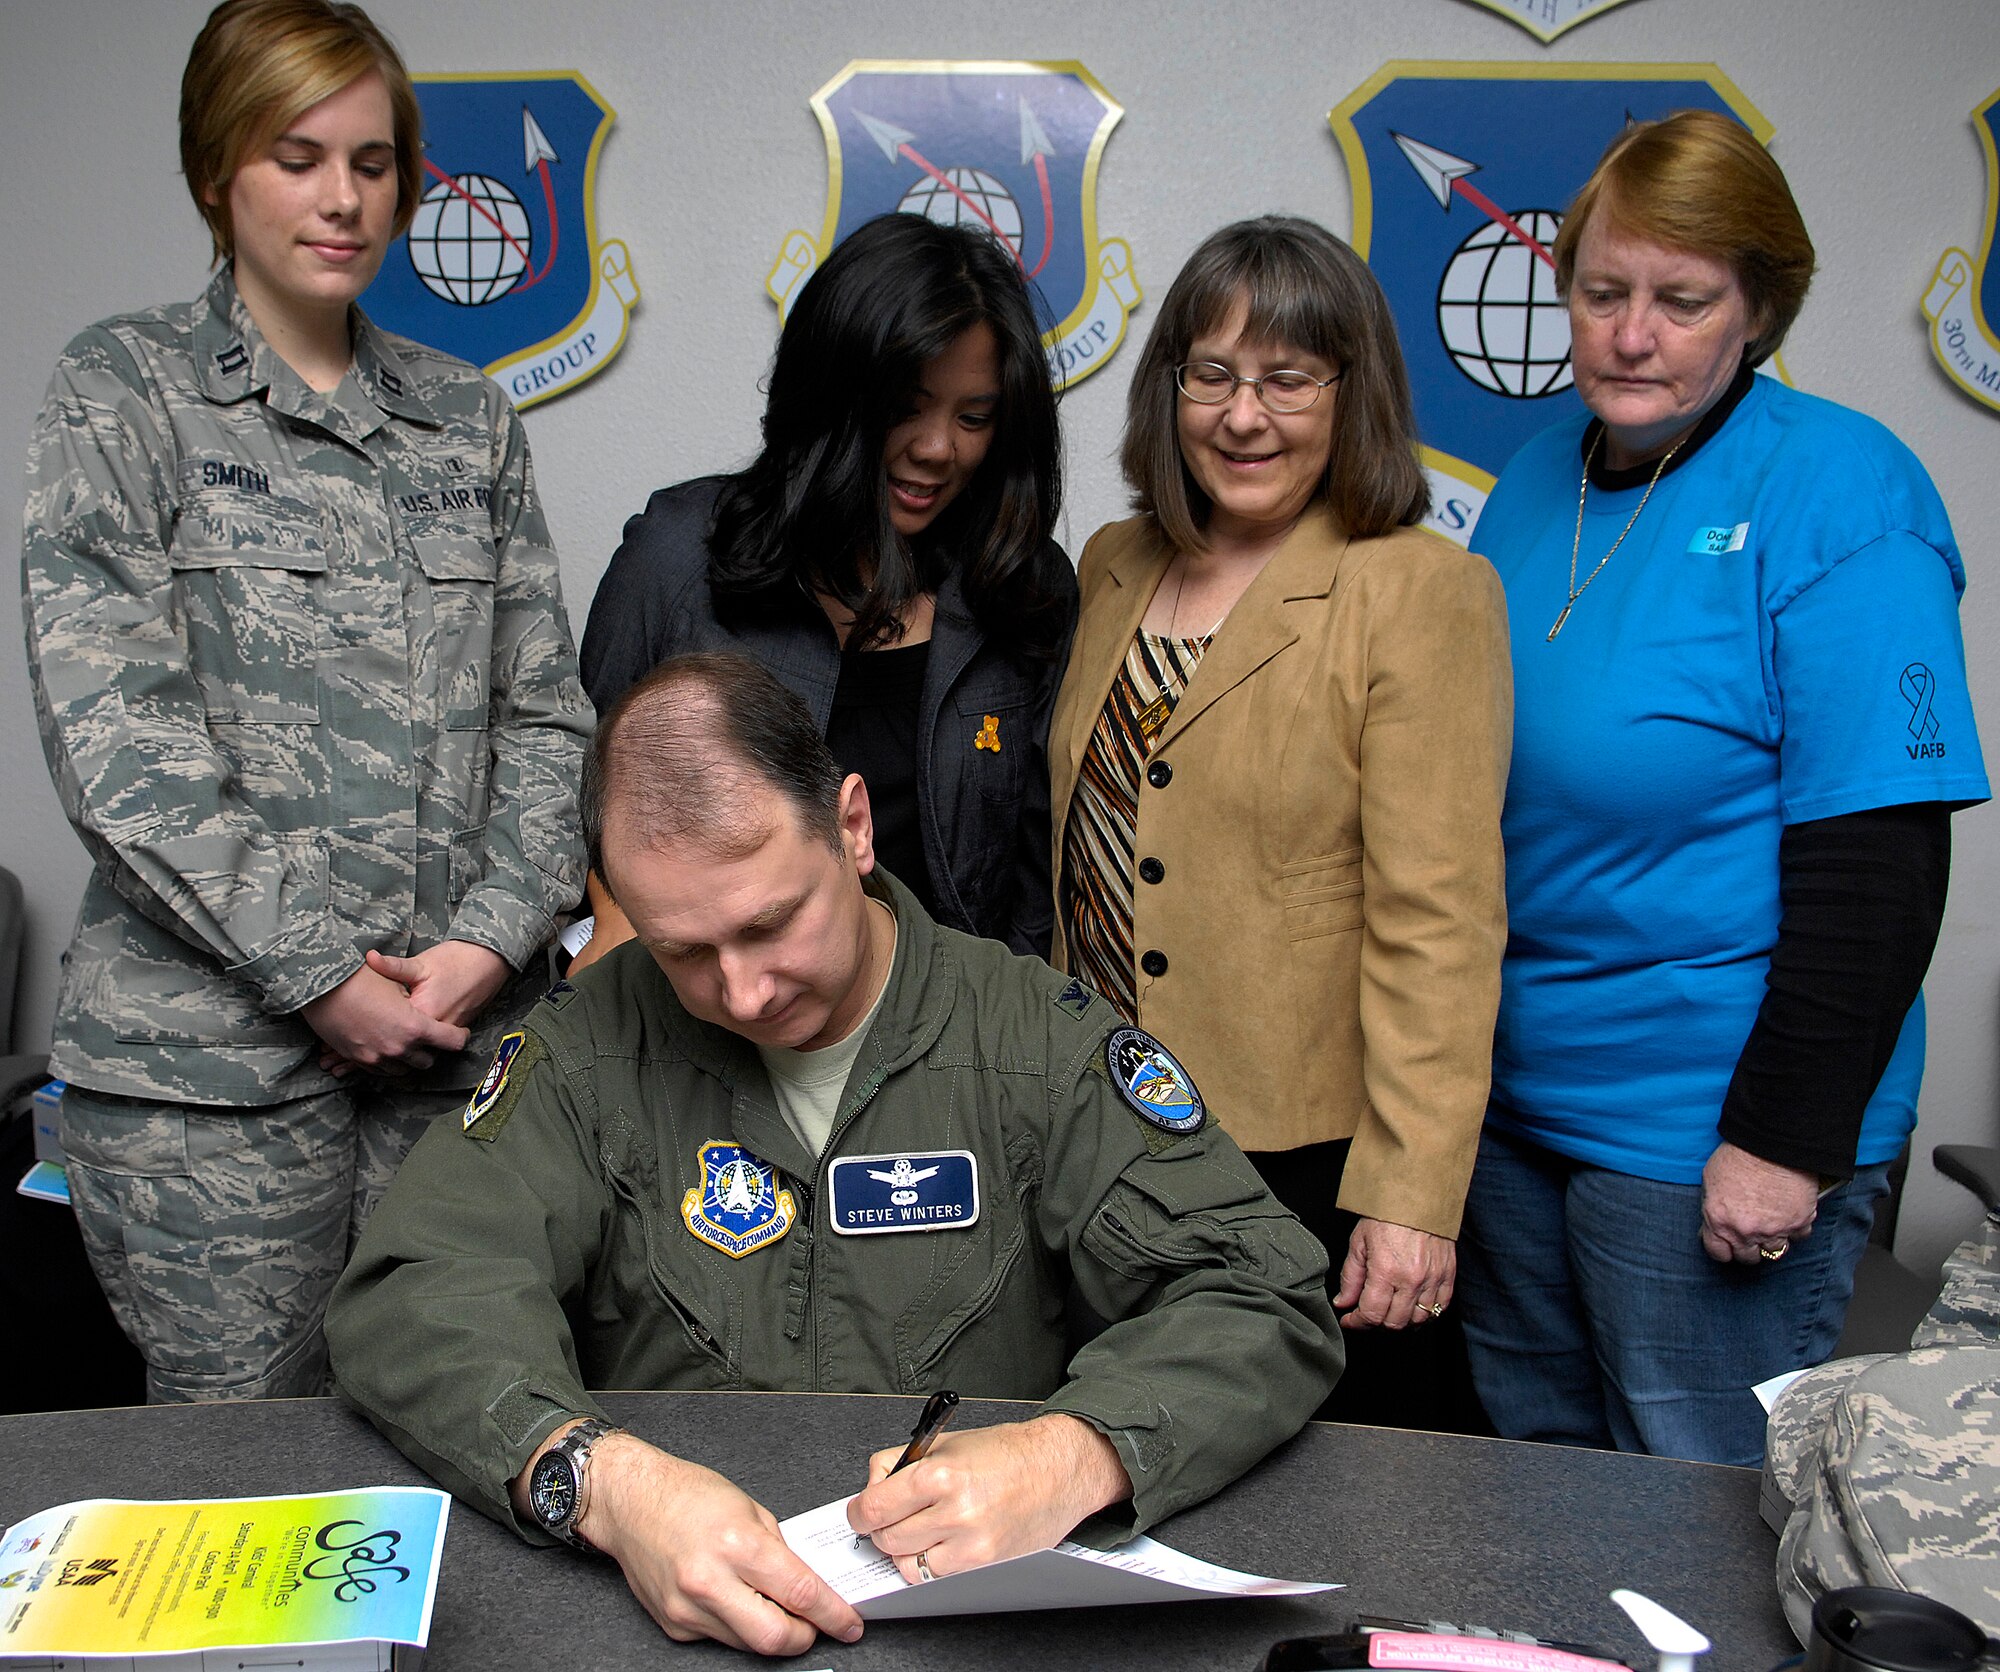 VANDENBERG AIR FORCE BASE, Calif. --  Col. Steven Winters,  the 30th Space Wing vice commander, signs the April Awareness Month proclamation here Wednesday, March 31, 2010. (From left to right) Capt. Jodi Smith, from the 30th Medical Operations Squadron, Ms. Pauline Chui, Vandenberg's Family Advocacy outreach manager, Ms. Sally Galligan, the Airman and Family Readiness Center chief, and Ms. Donna Rathbun, the Sexual Assault Response coordinator, stand behind Colonel Winters as he signs the proclamation. During the month of April, Vandenberg has pledged to recognize Child Abuse Prevention Month, Sexual Assualt Prevention Month and Alcohol Awareness Month. (U.S. Air Force photo/Airman 1st Class Andrew Lee)